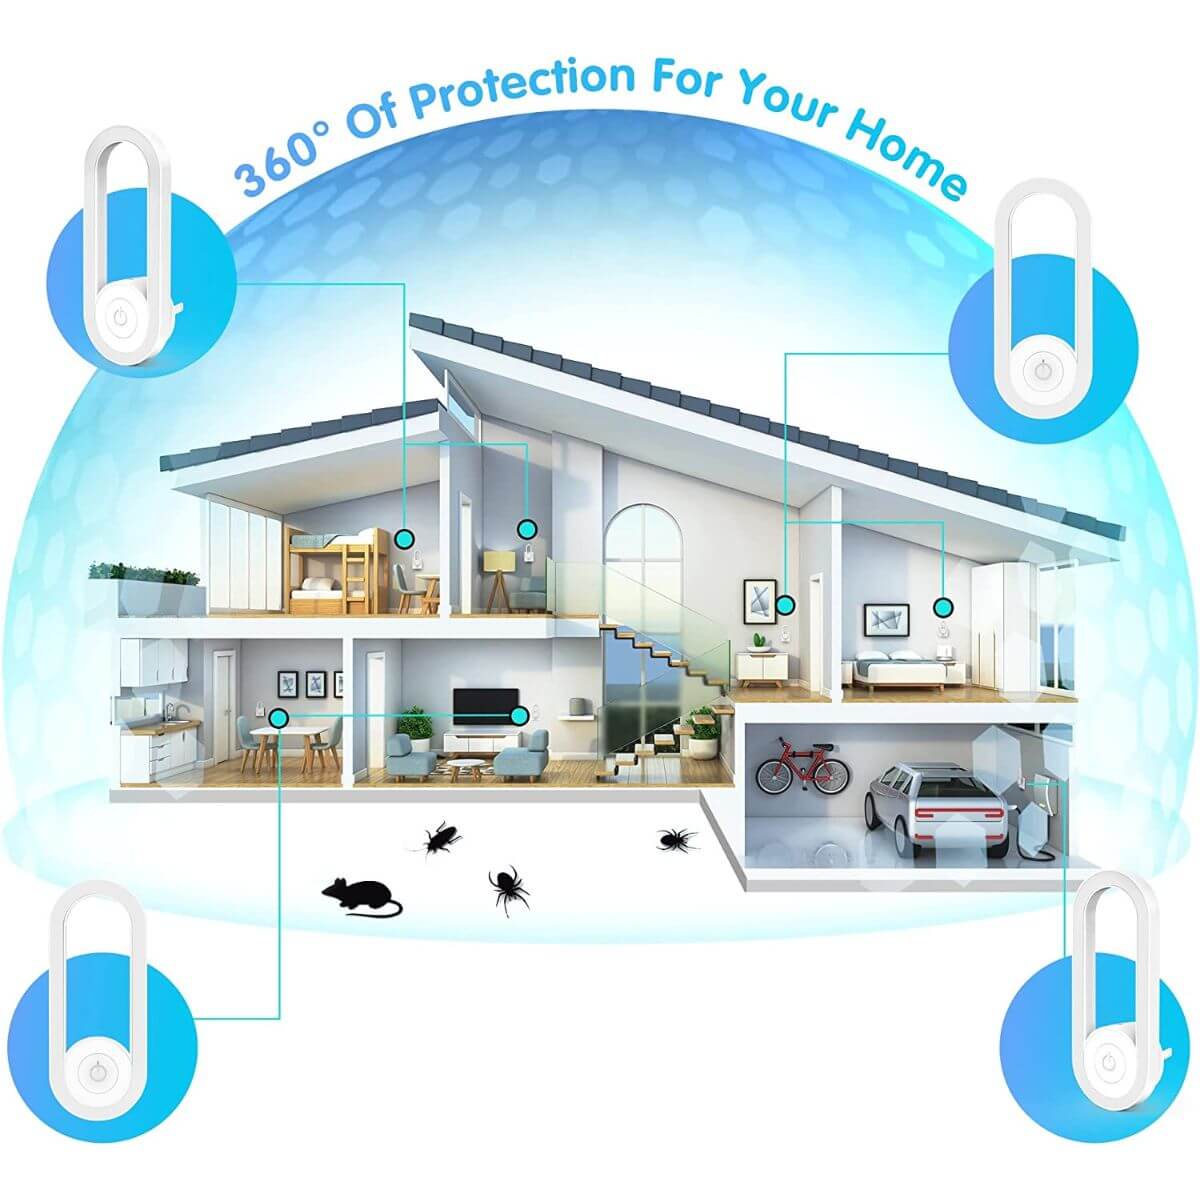 360-degree protection for your home